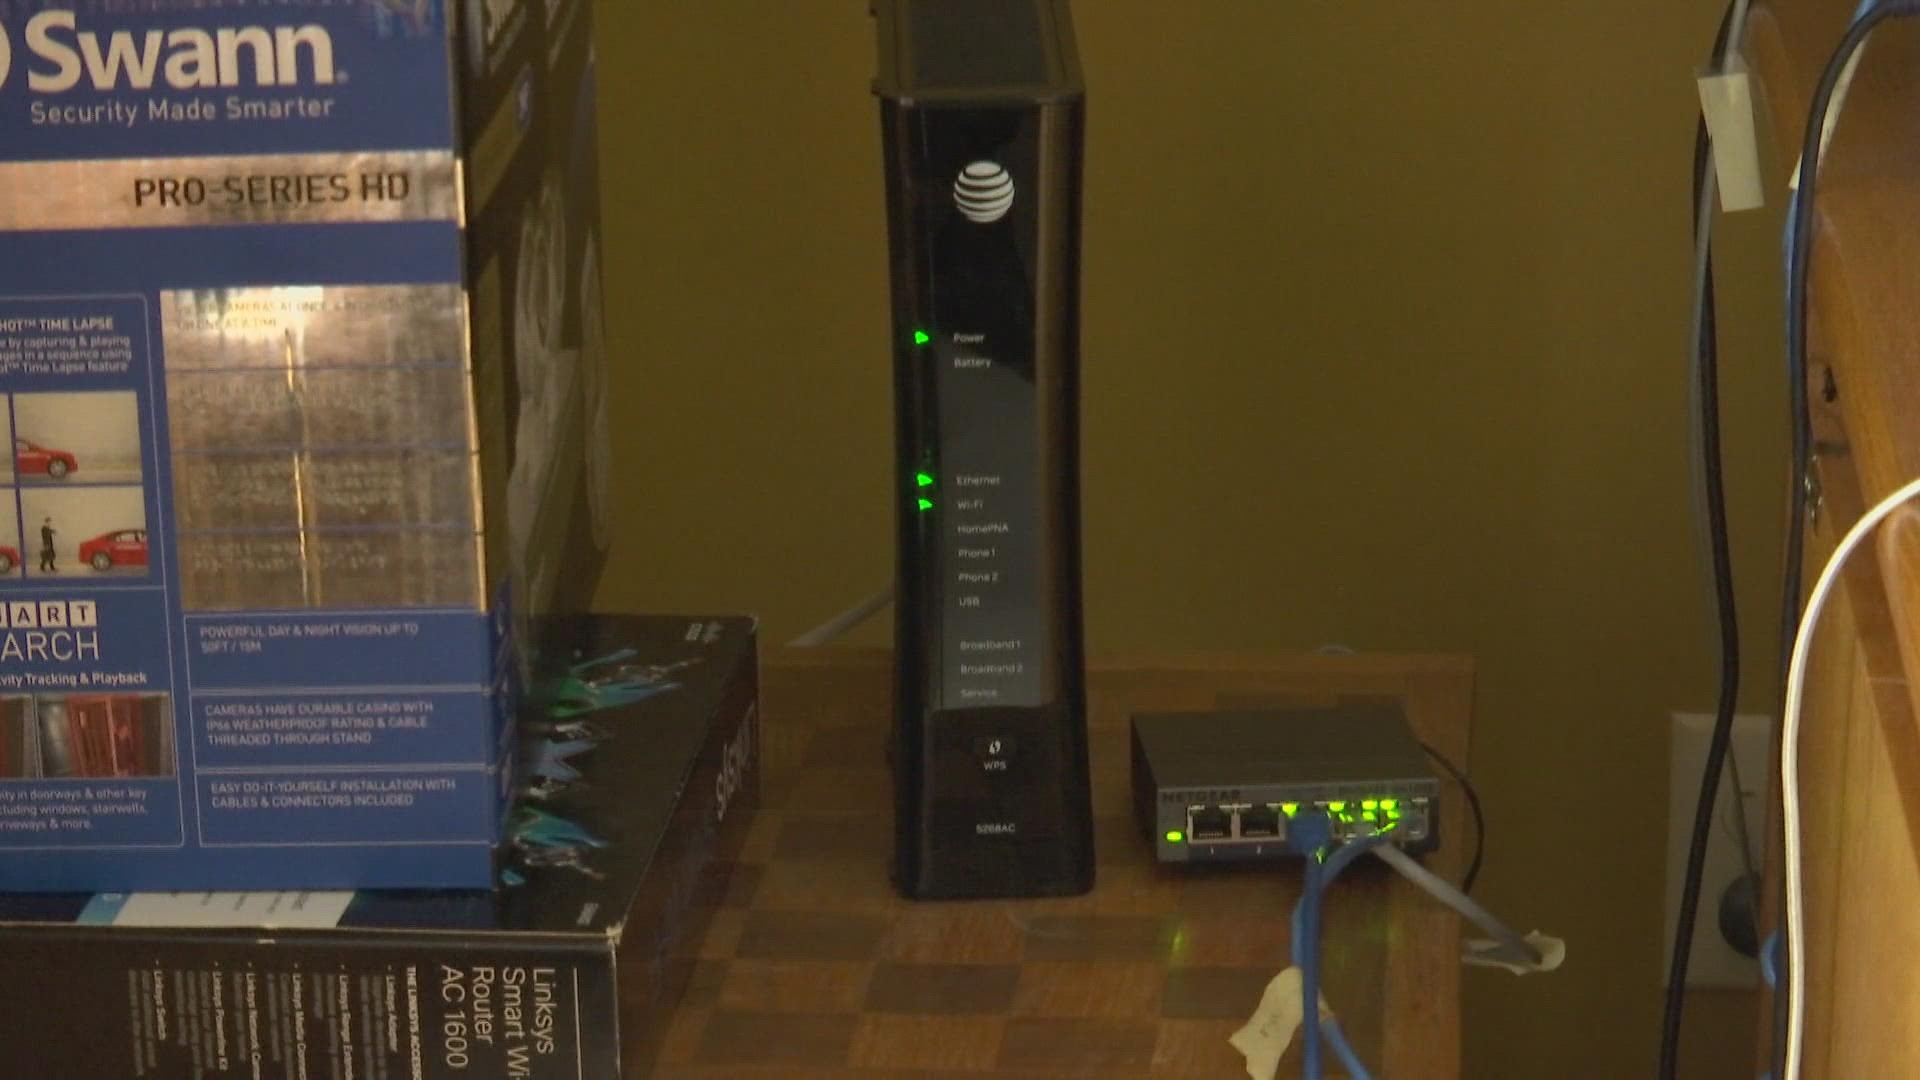 The Patel family in Cumberland lost their AT&T internet service Thursday. Their neighbors experienced the same, and told 13News customer service was not helping.